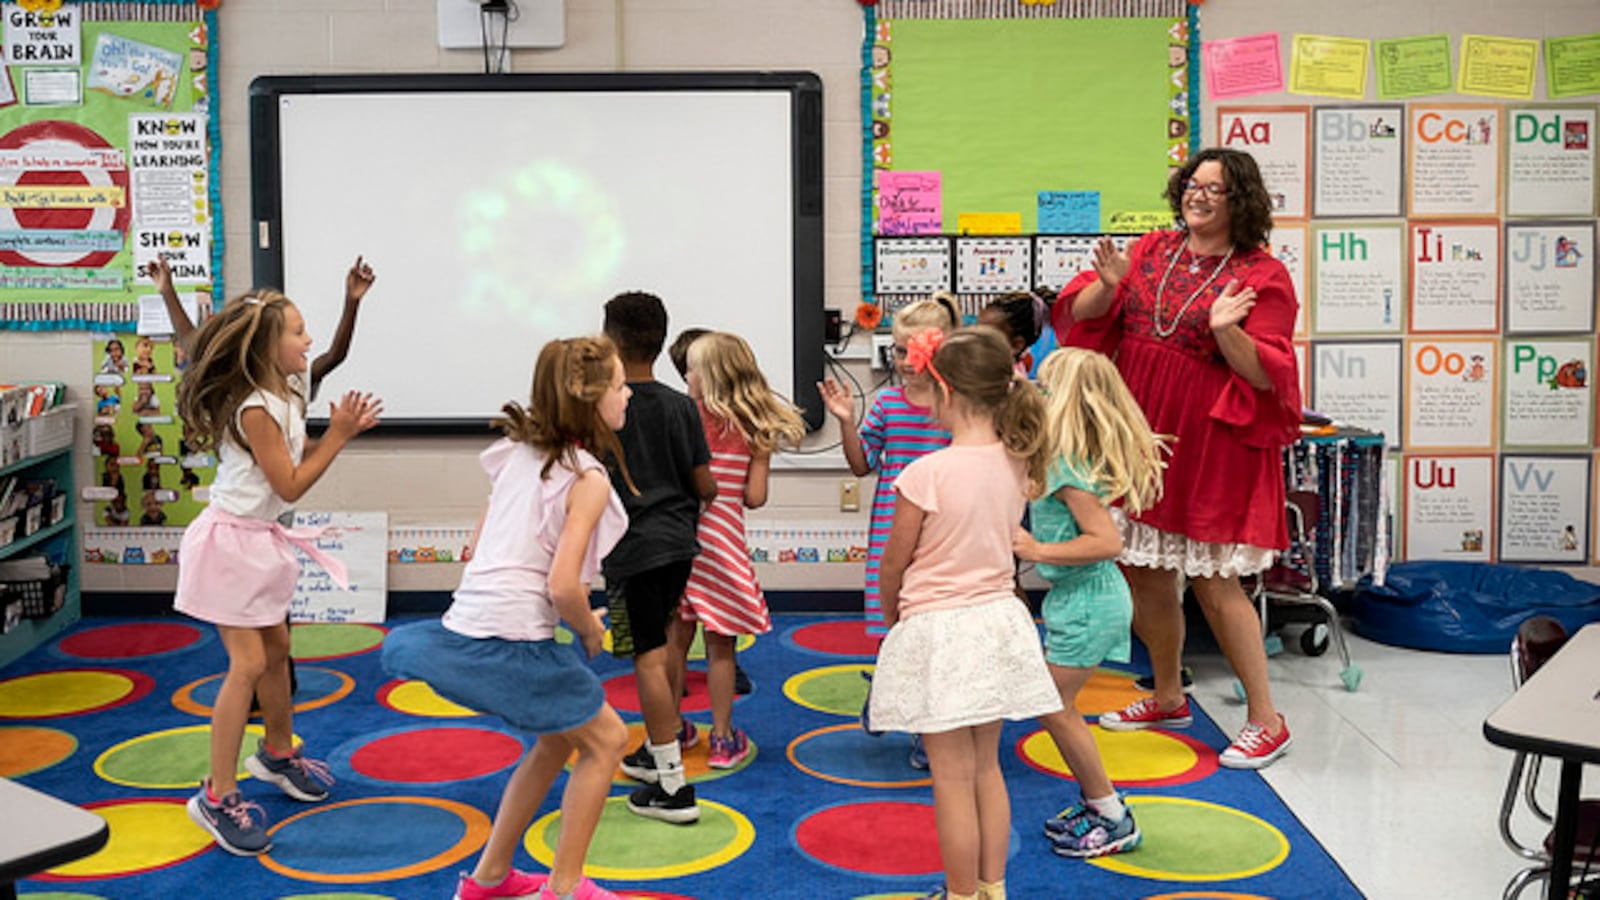 Melissa Miller leads her students in a learning game at Franklin Elementary School in Franklin Special School District in Williamson County. Miller is Tennessee's 2018-19 Teacher of the Year.